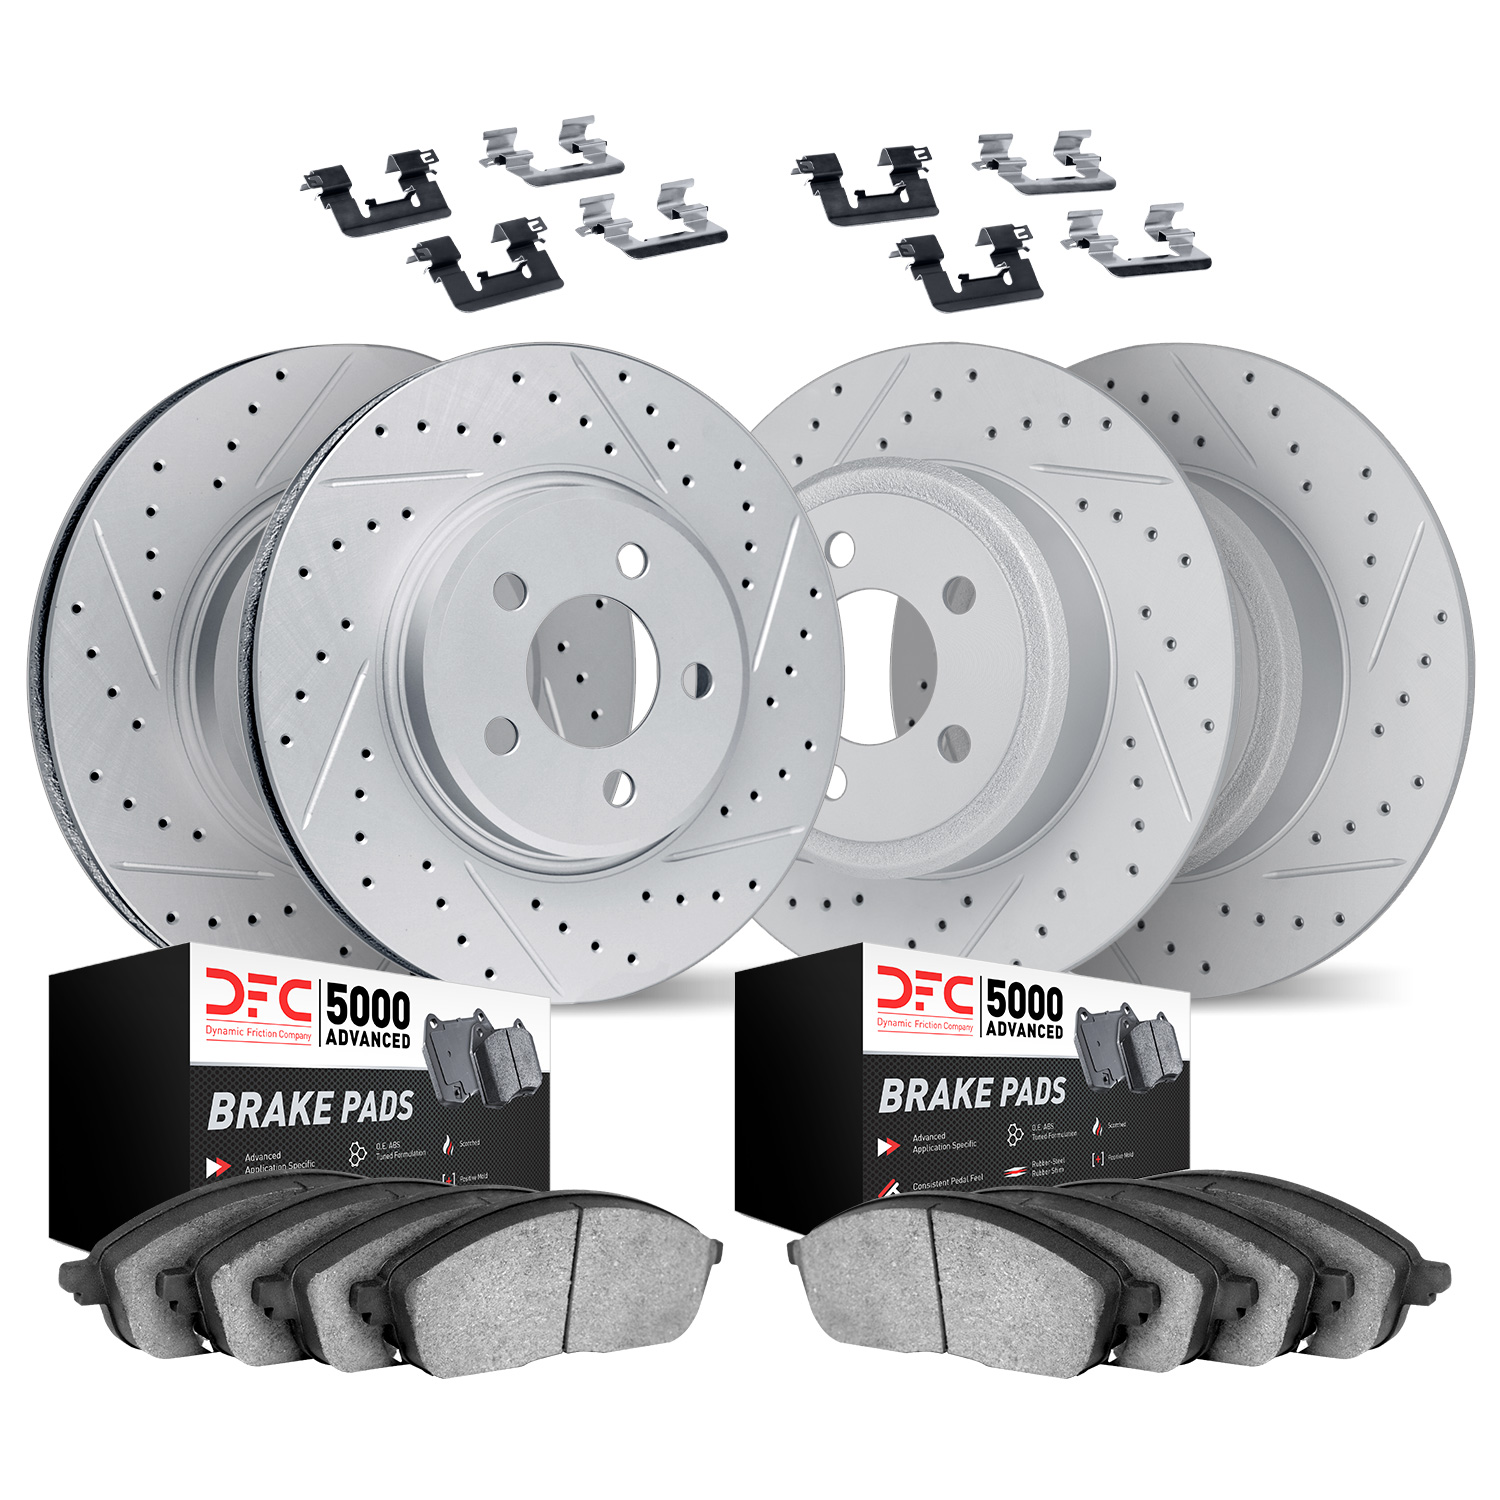 2514-45030 Geoperformance Drilled/Slotted Rotors w/5000 Advanced Brake Pads Kit & Hardware, 2019-2020 GM, Position: Front and Re